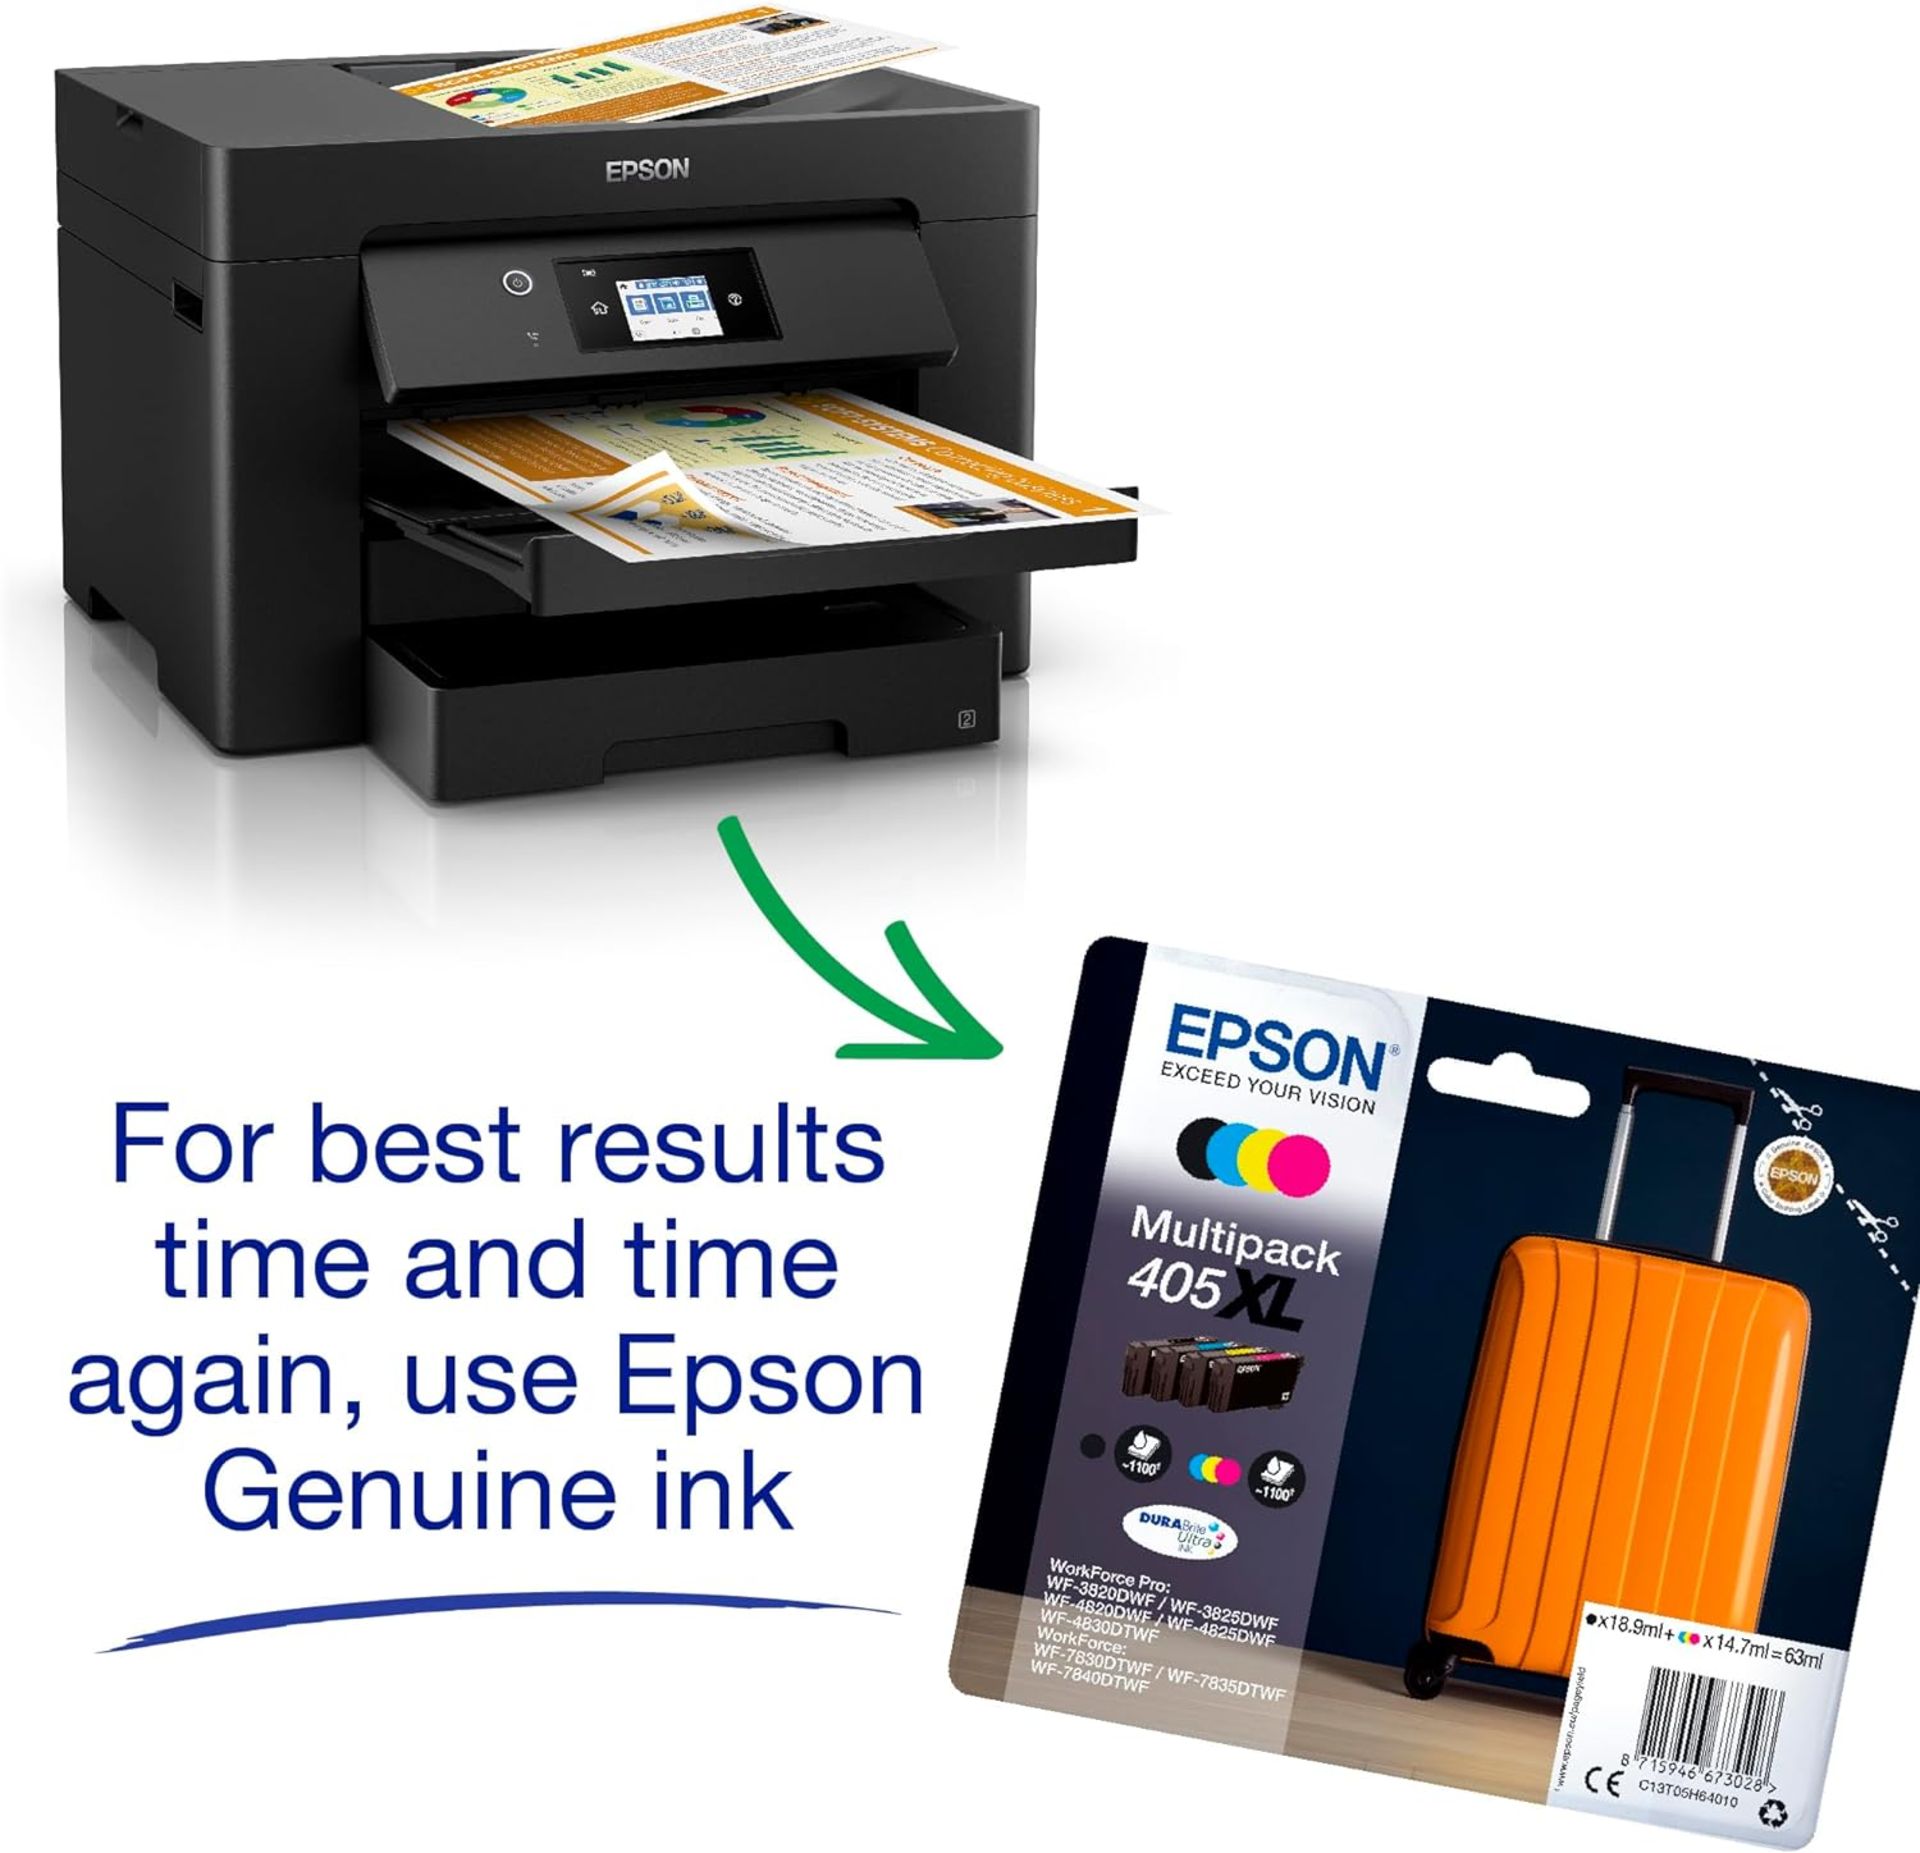 BRAND NEW FACTORY SEALED EPSON WF-7830DTWF All-in-One Wireless Colour Printer with Scanner, - Image 6 of 7